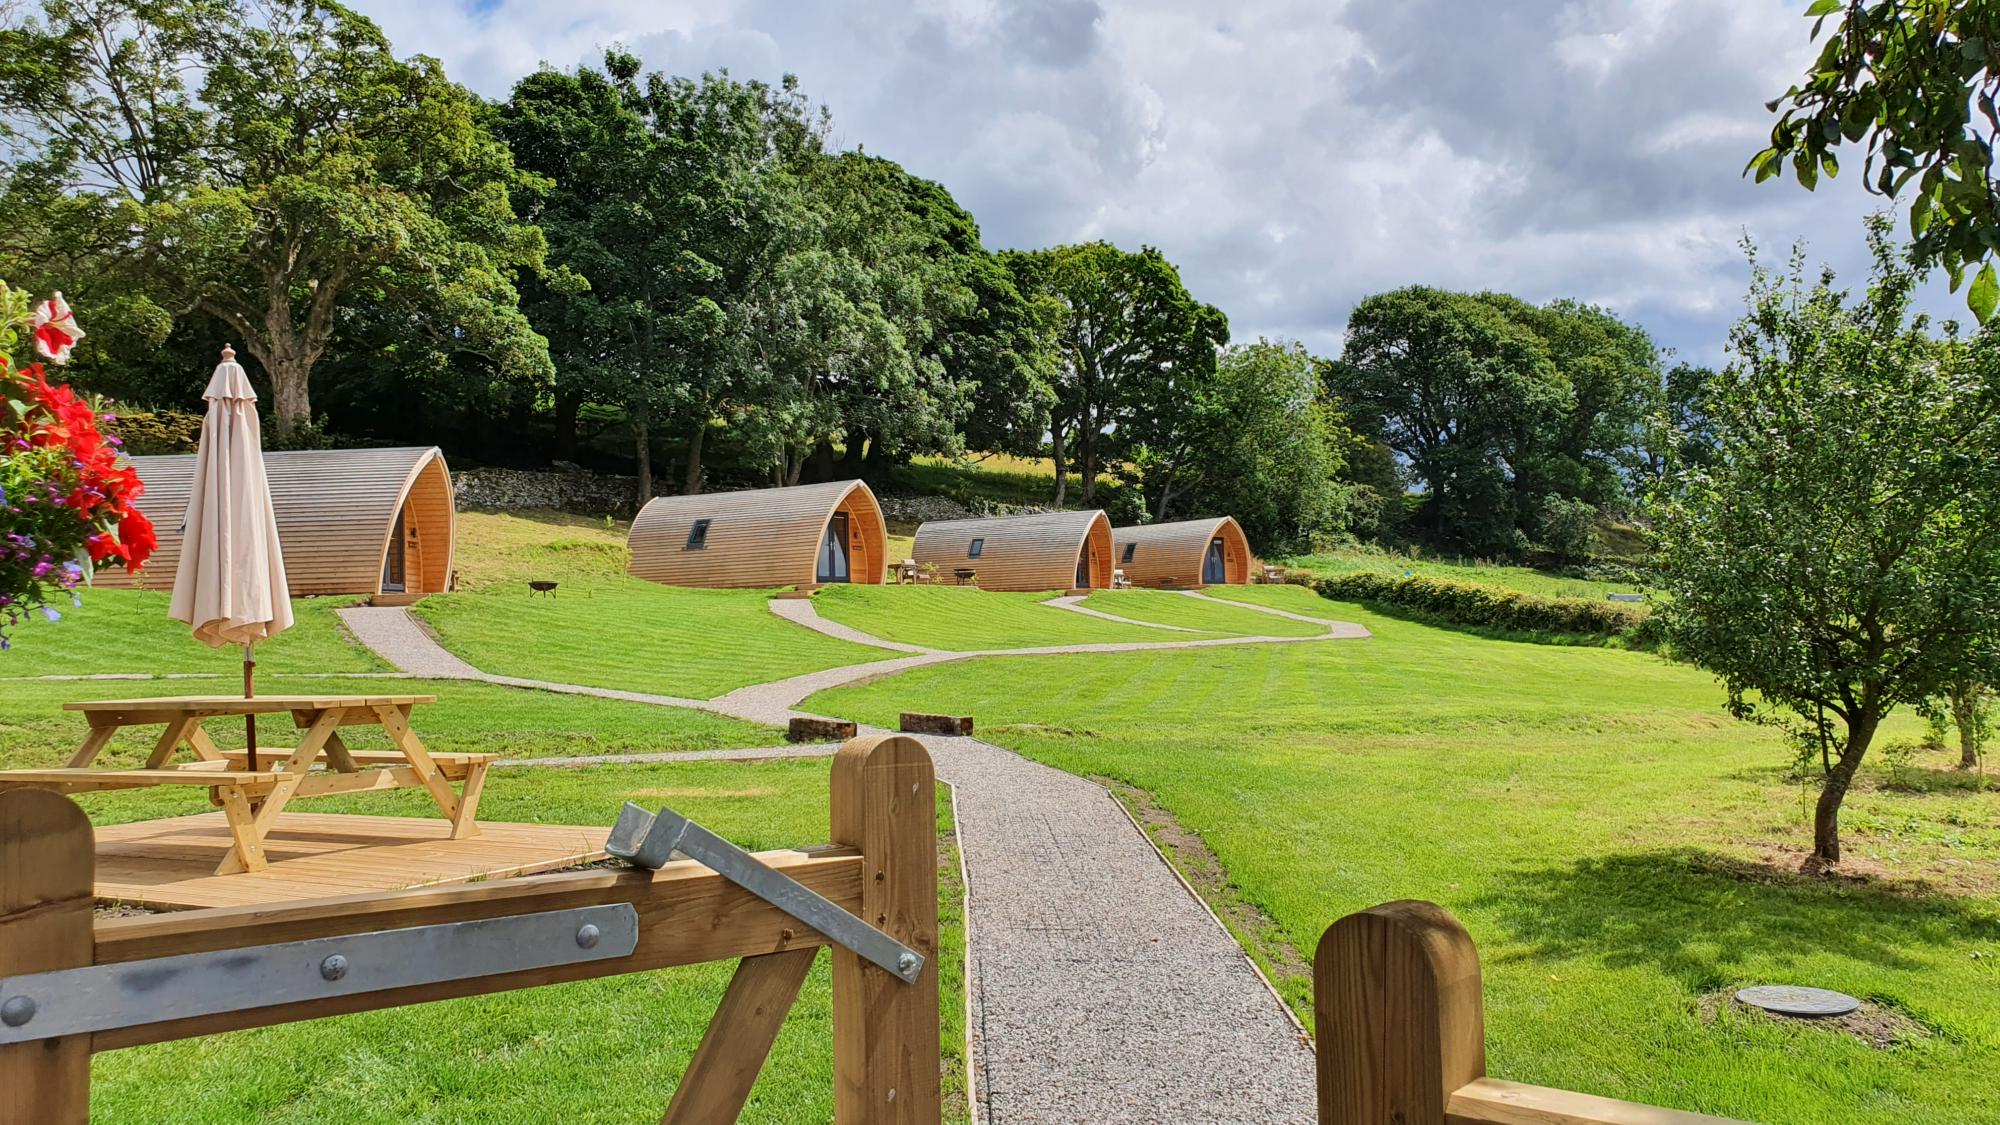 Dog-Friendly Camping in Lake District: Pods, campsites with dogs allowed